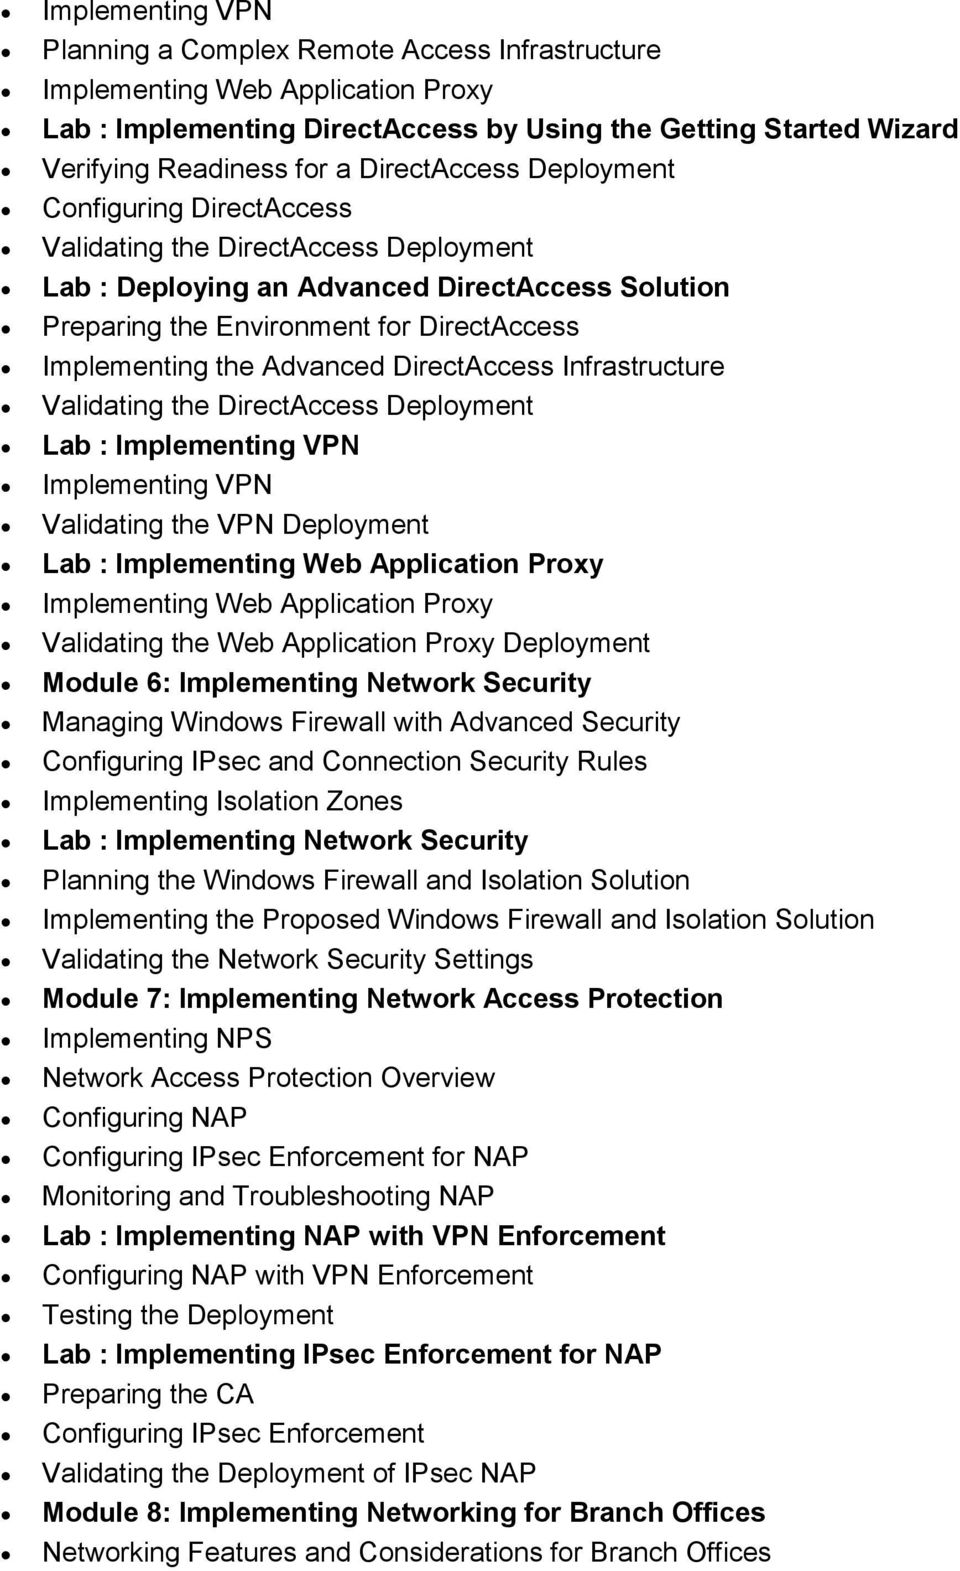 Advanced DirectAccess Infrastructure Validating the DirectAccess Deployment Lab : Implementing VPN Implementing VPN Validating the VPN Deployment Lab : Implementing Web Application Proxy Implementing